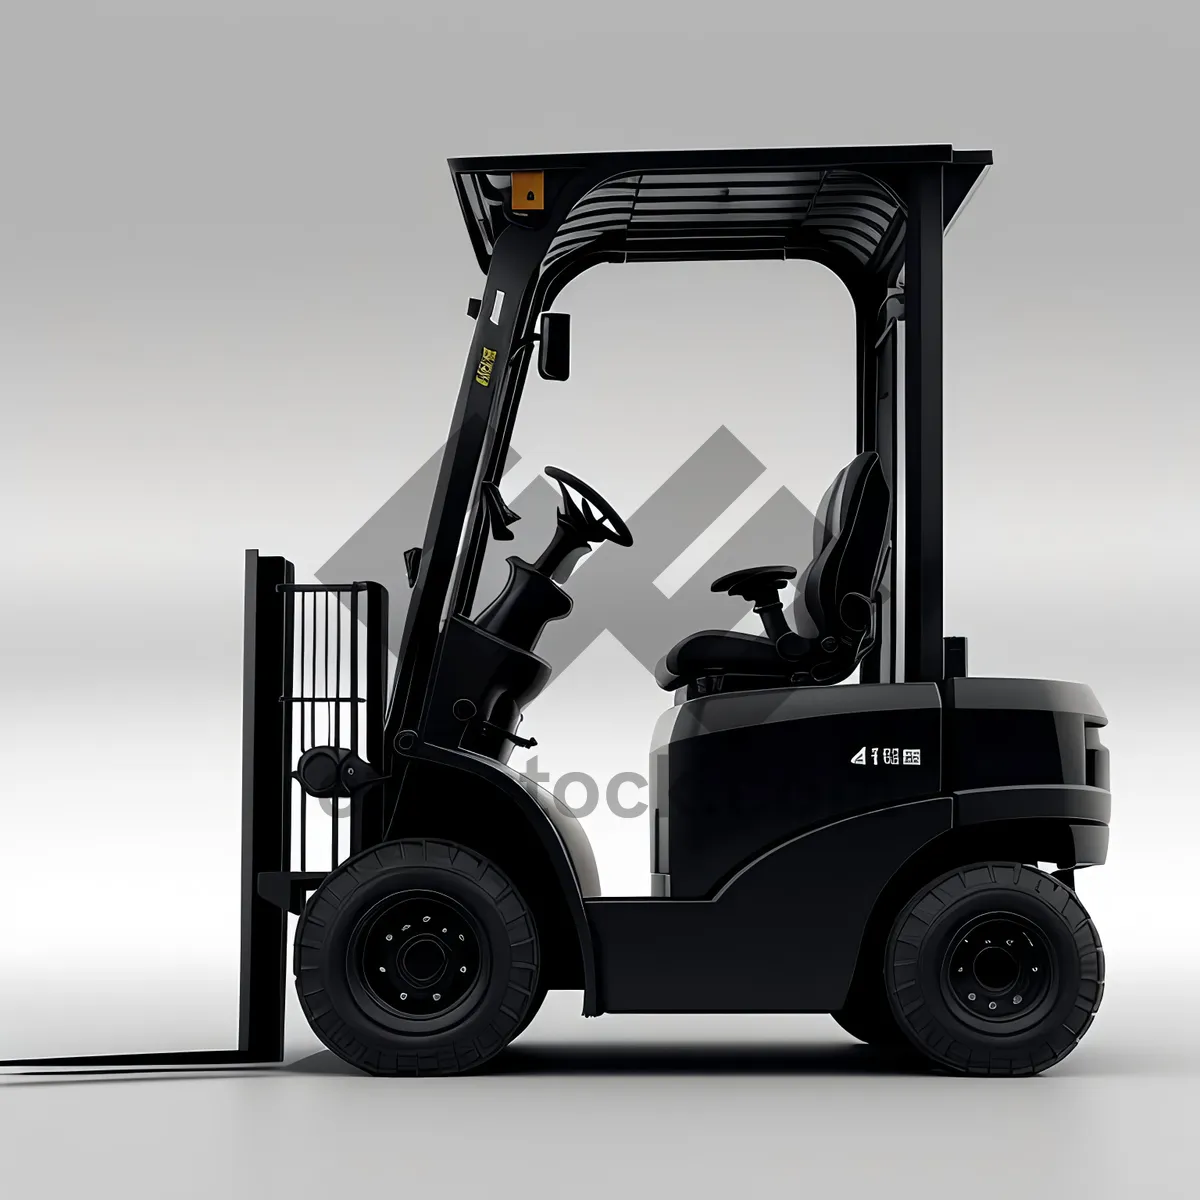 Picture of Heavy Duty Forklift: Industrial Workhorse for Construction and Transportation